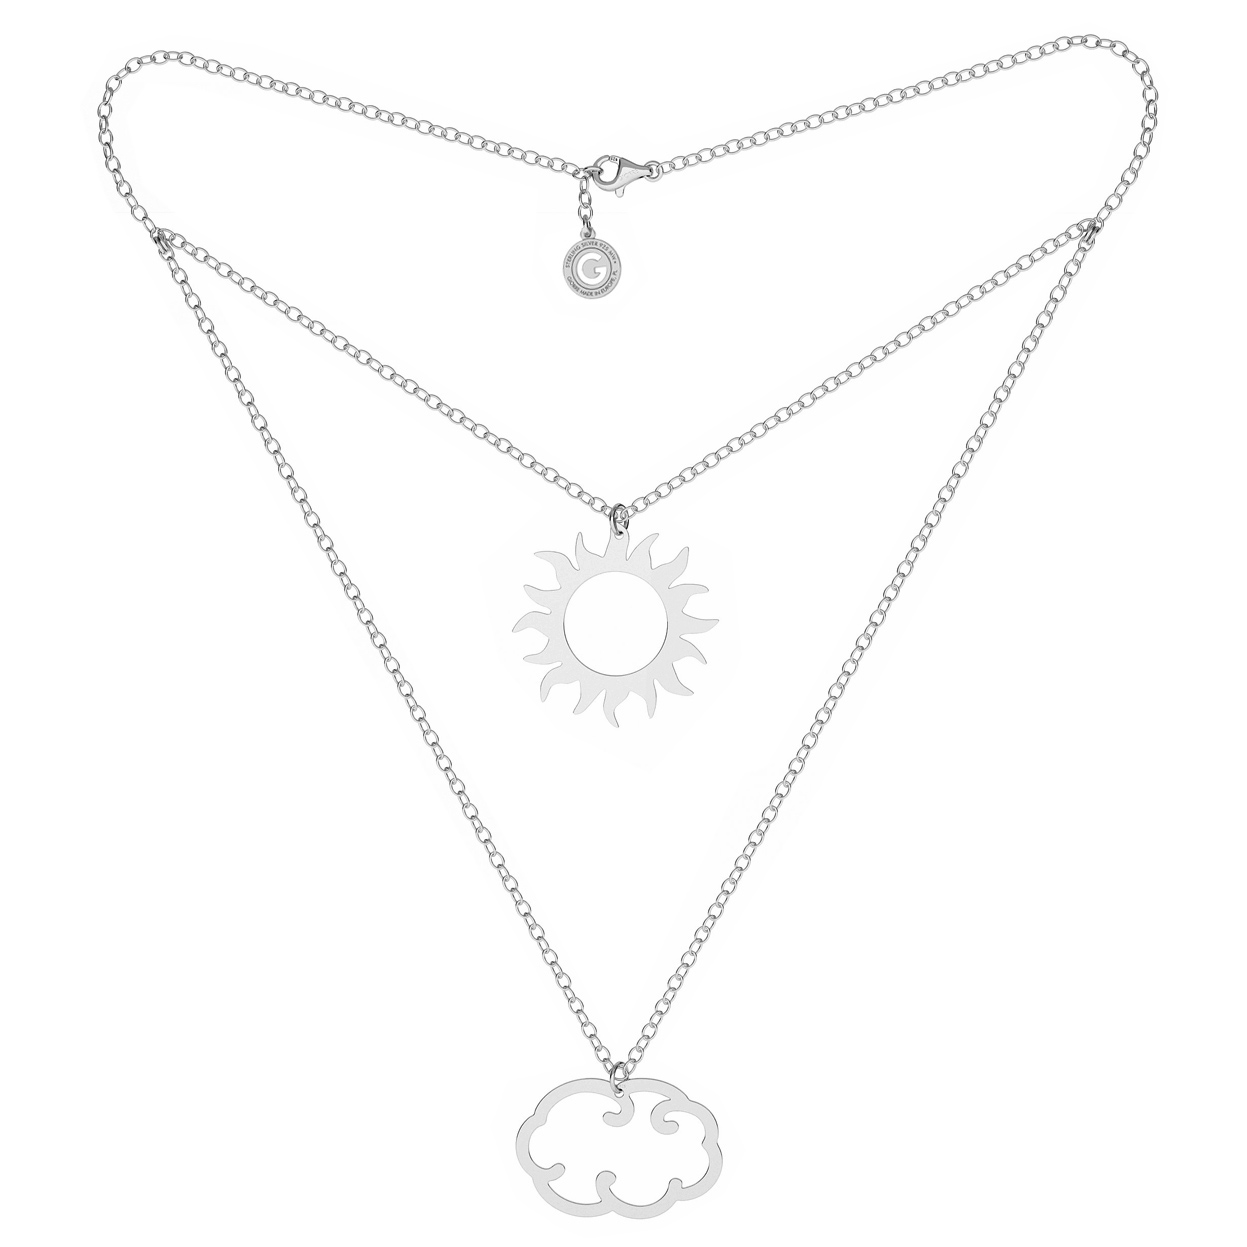 MOON AND STAR NECKLACE SILVER 925